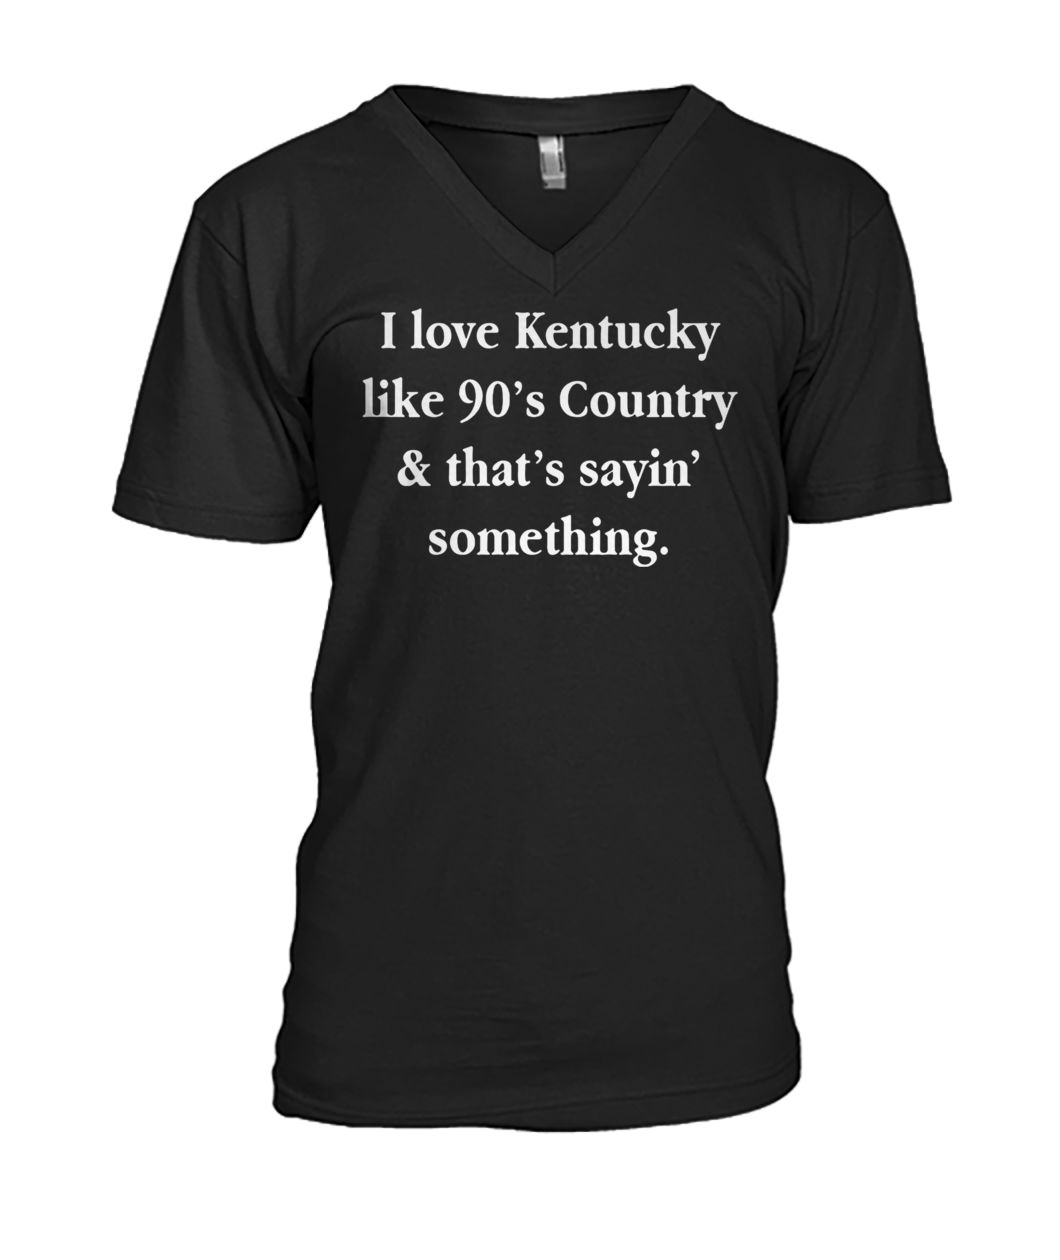 I love Kentucky like 90's country and that sayin' something mens v-neck